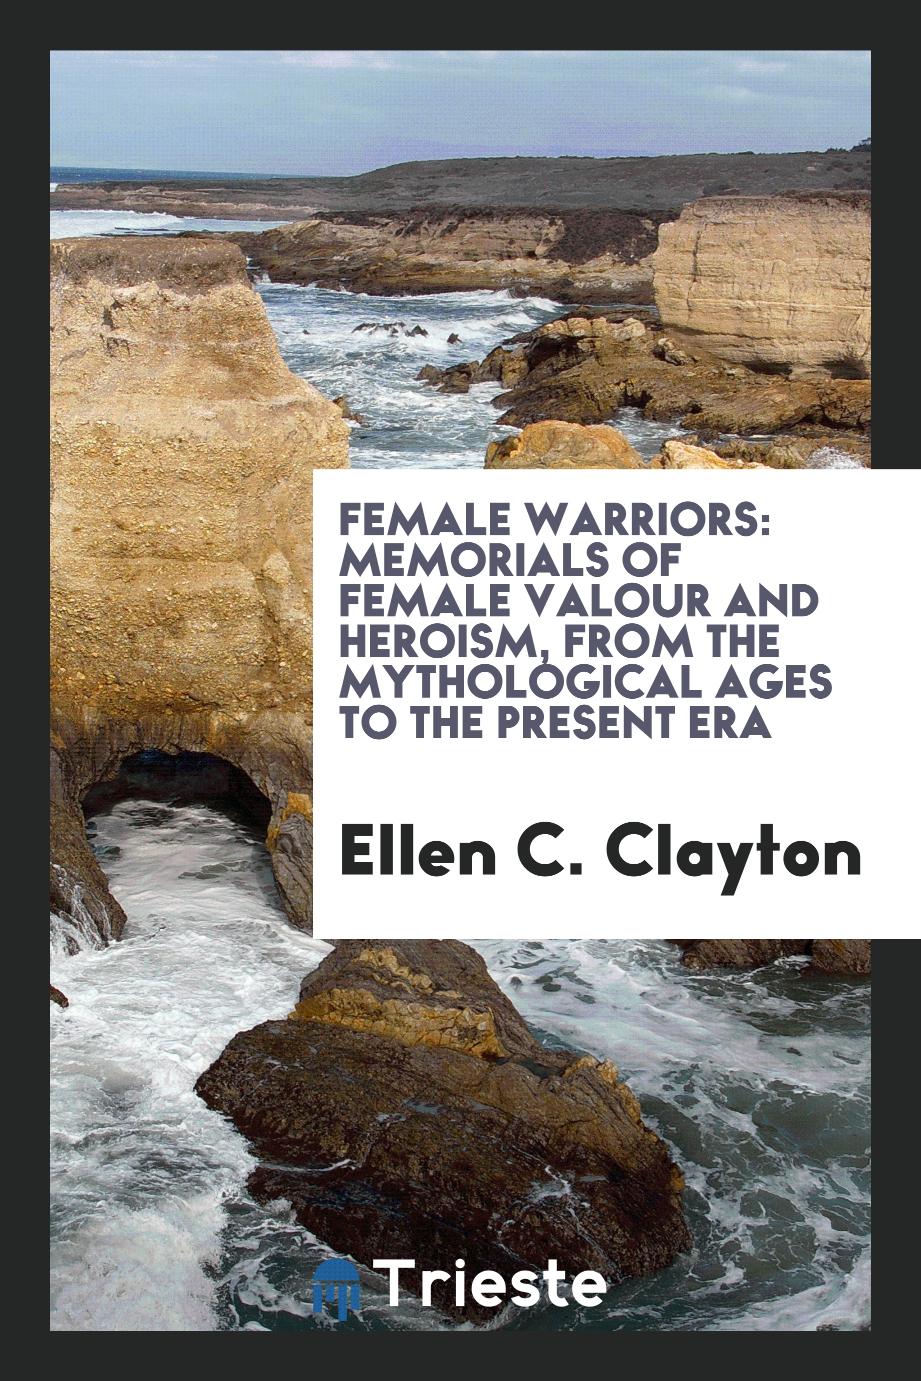 Female warriors: memorials of female valour and heroism, from the mythological ages to the present era